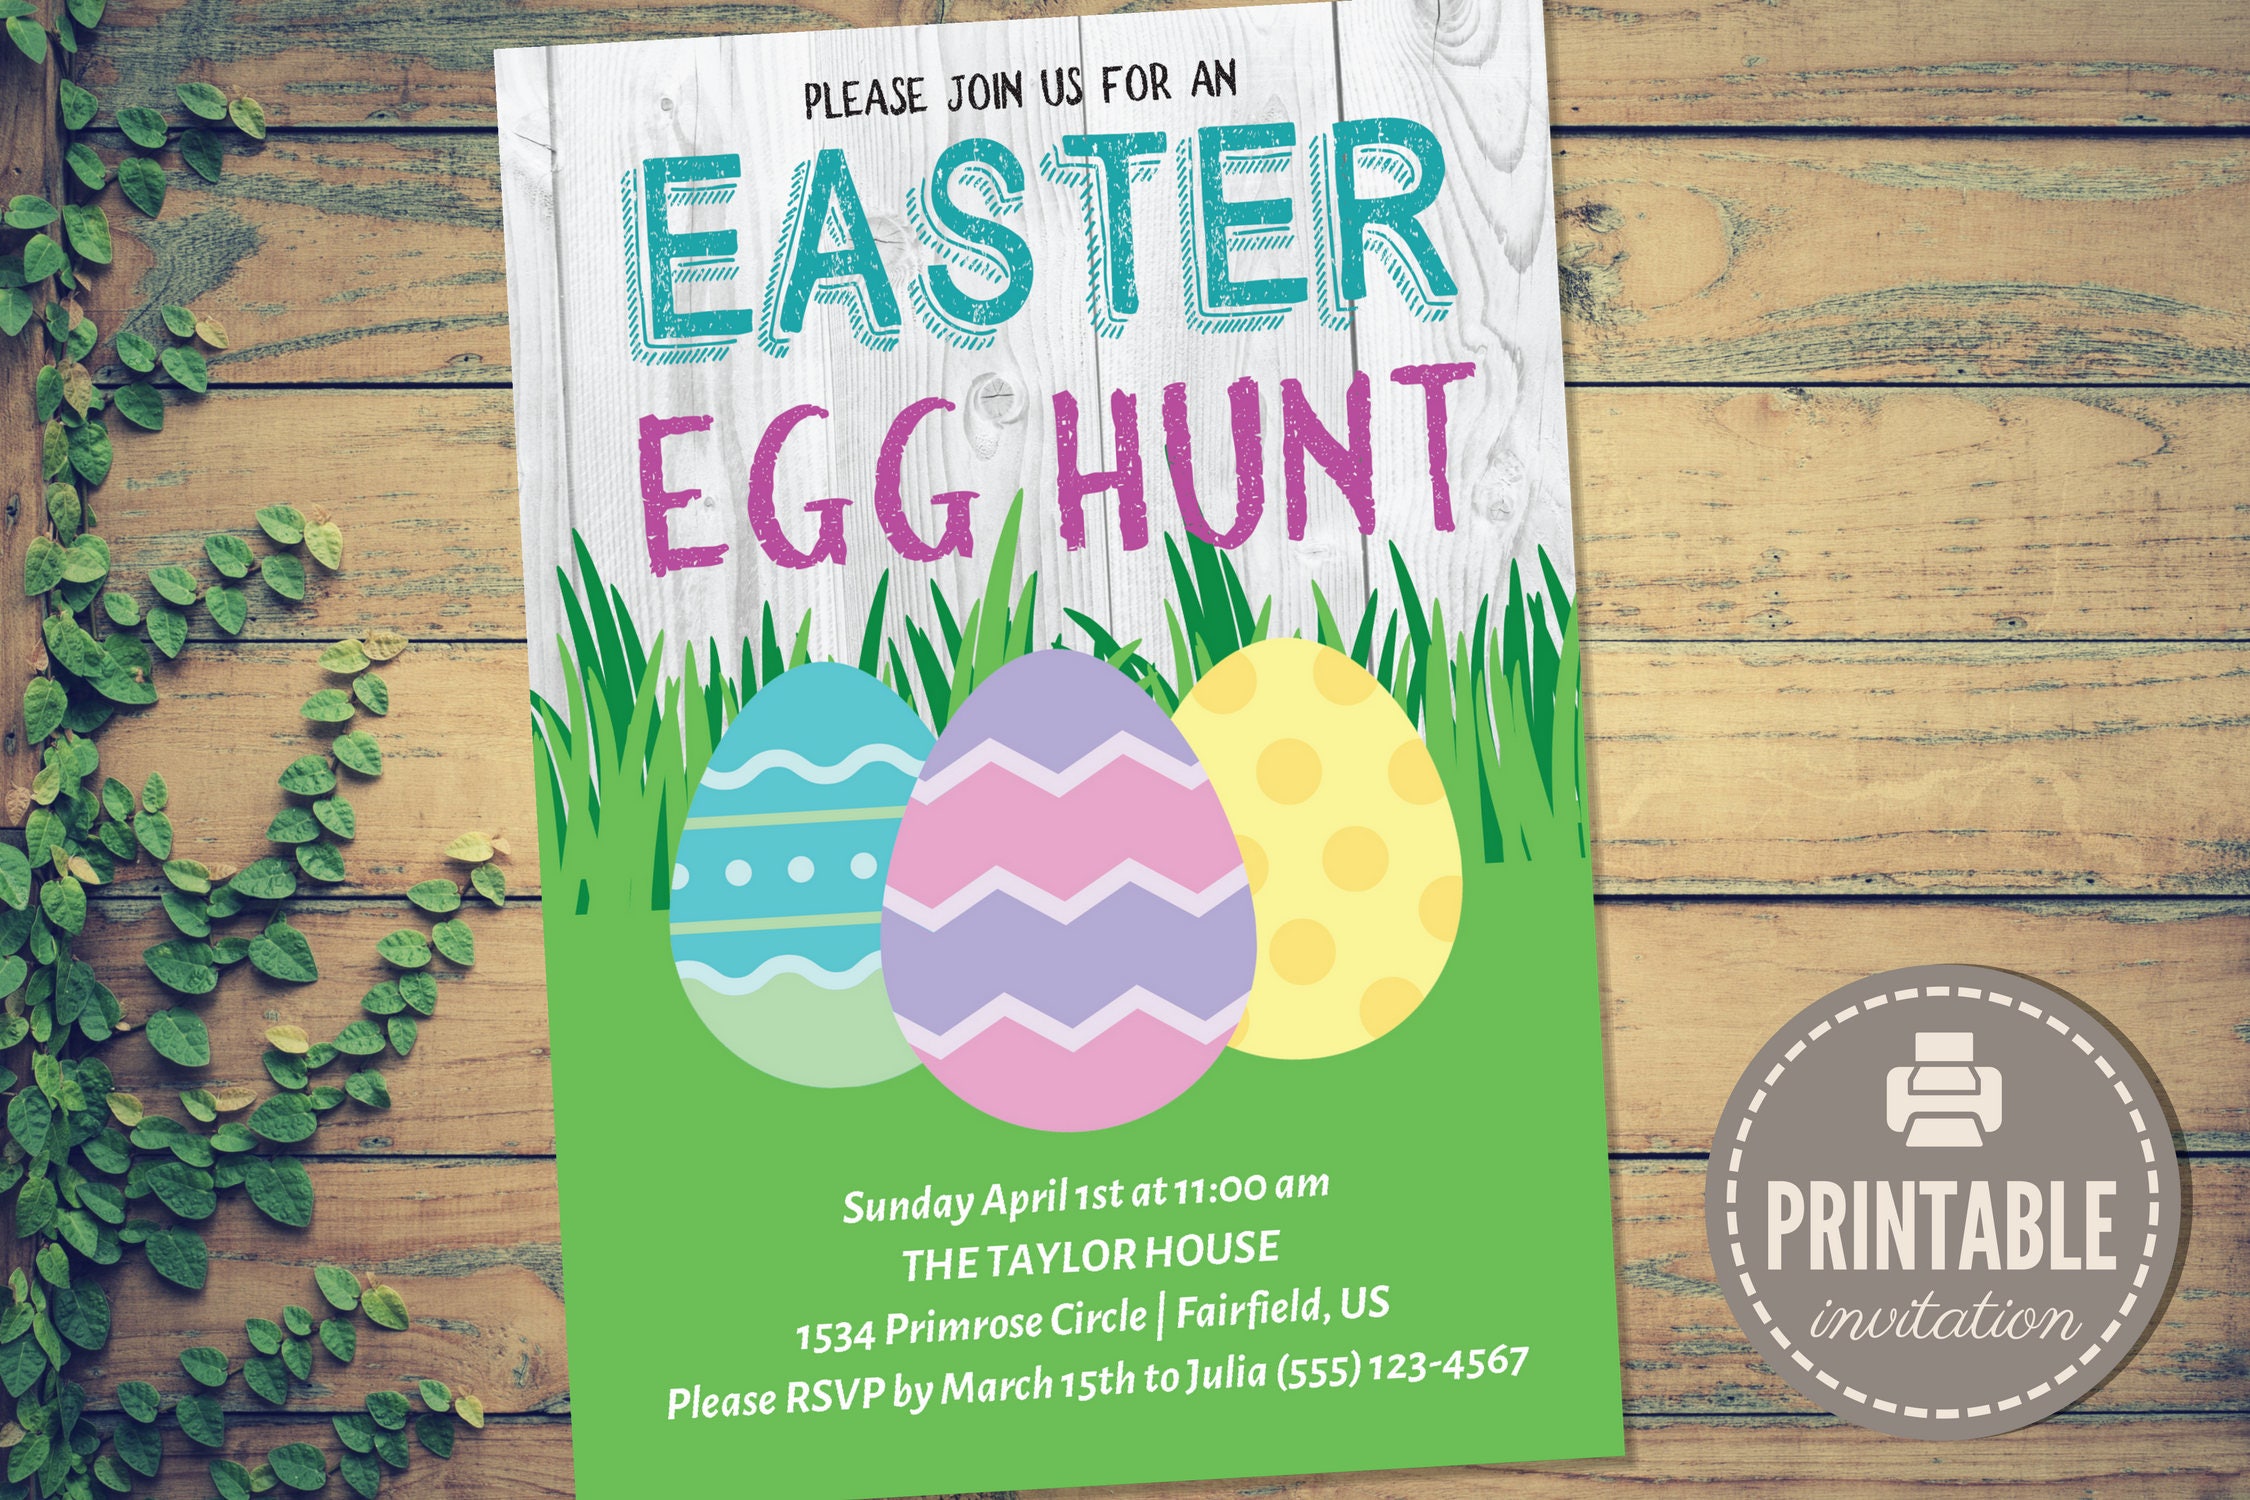 Printable Easter Egg Hunt Invitation Instant Download Editable Printable Colored Eggs Easter Party or Brunch Invitation PDF Template